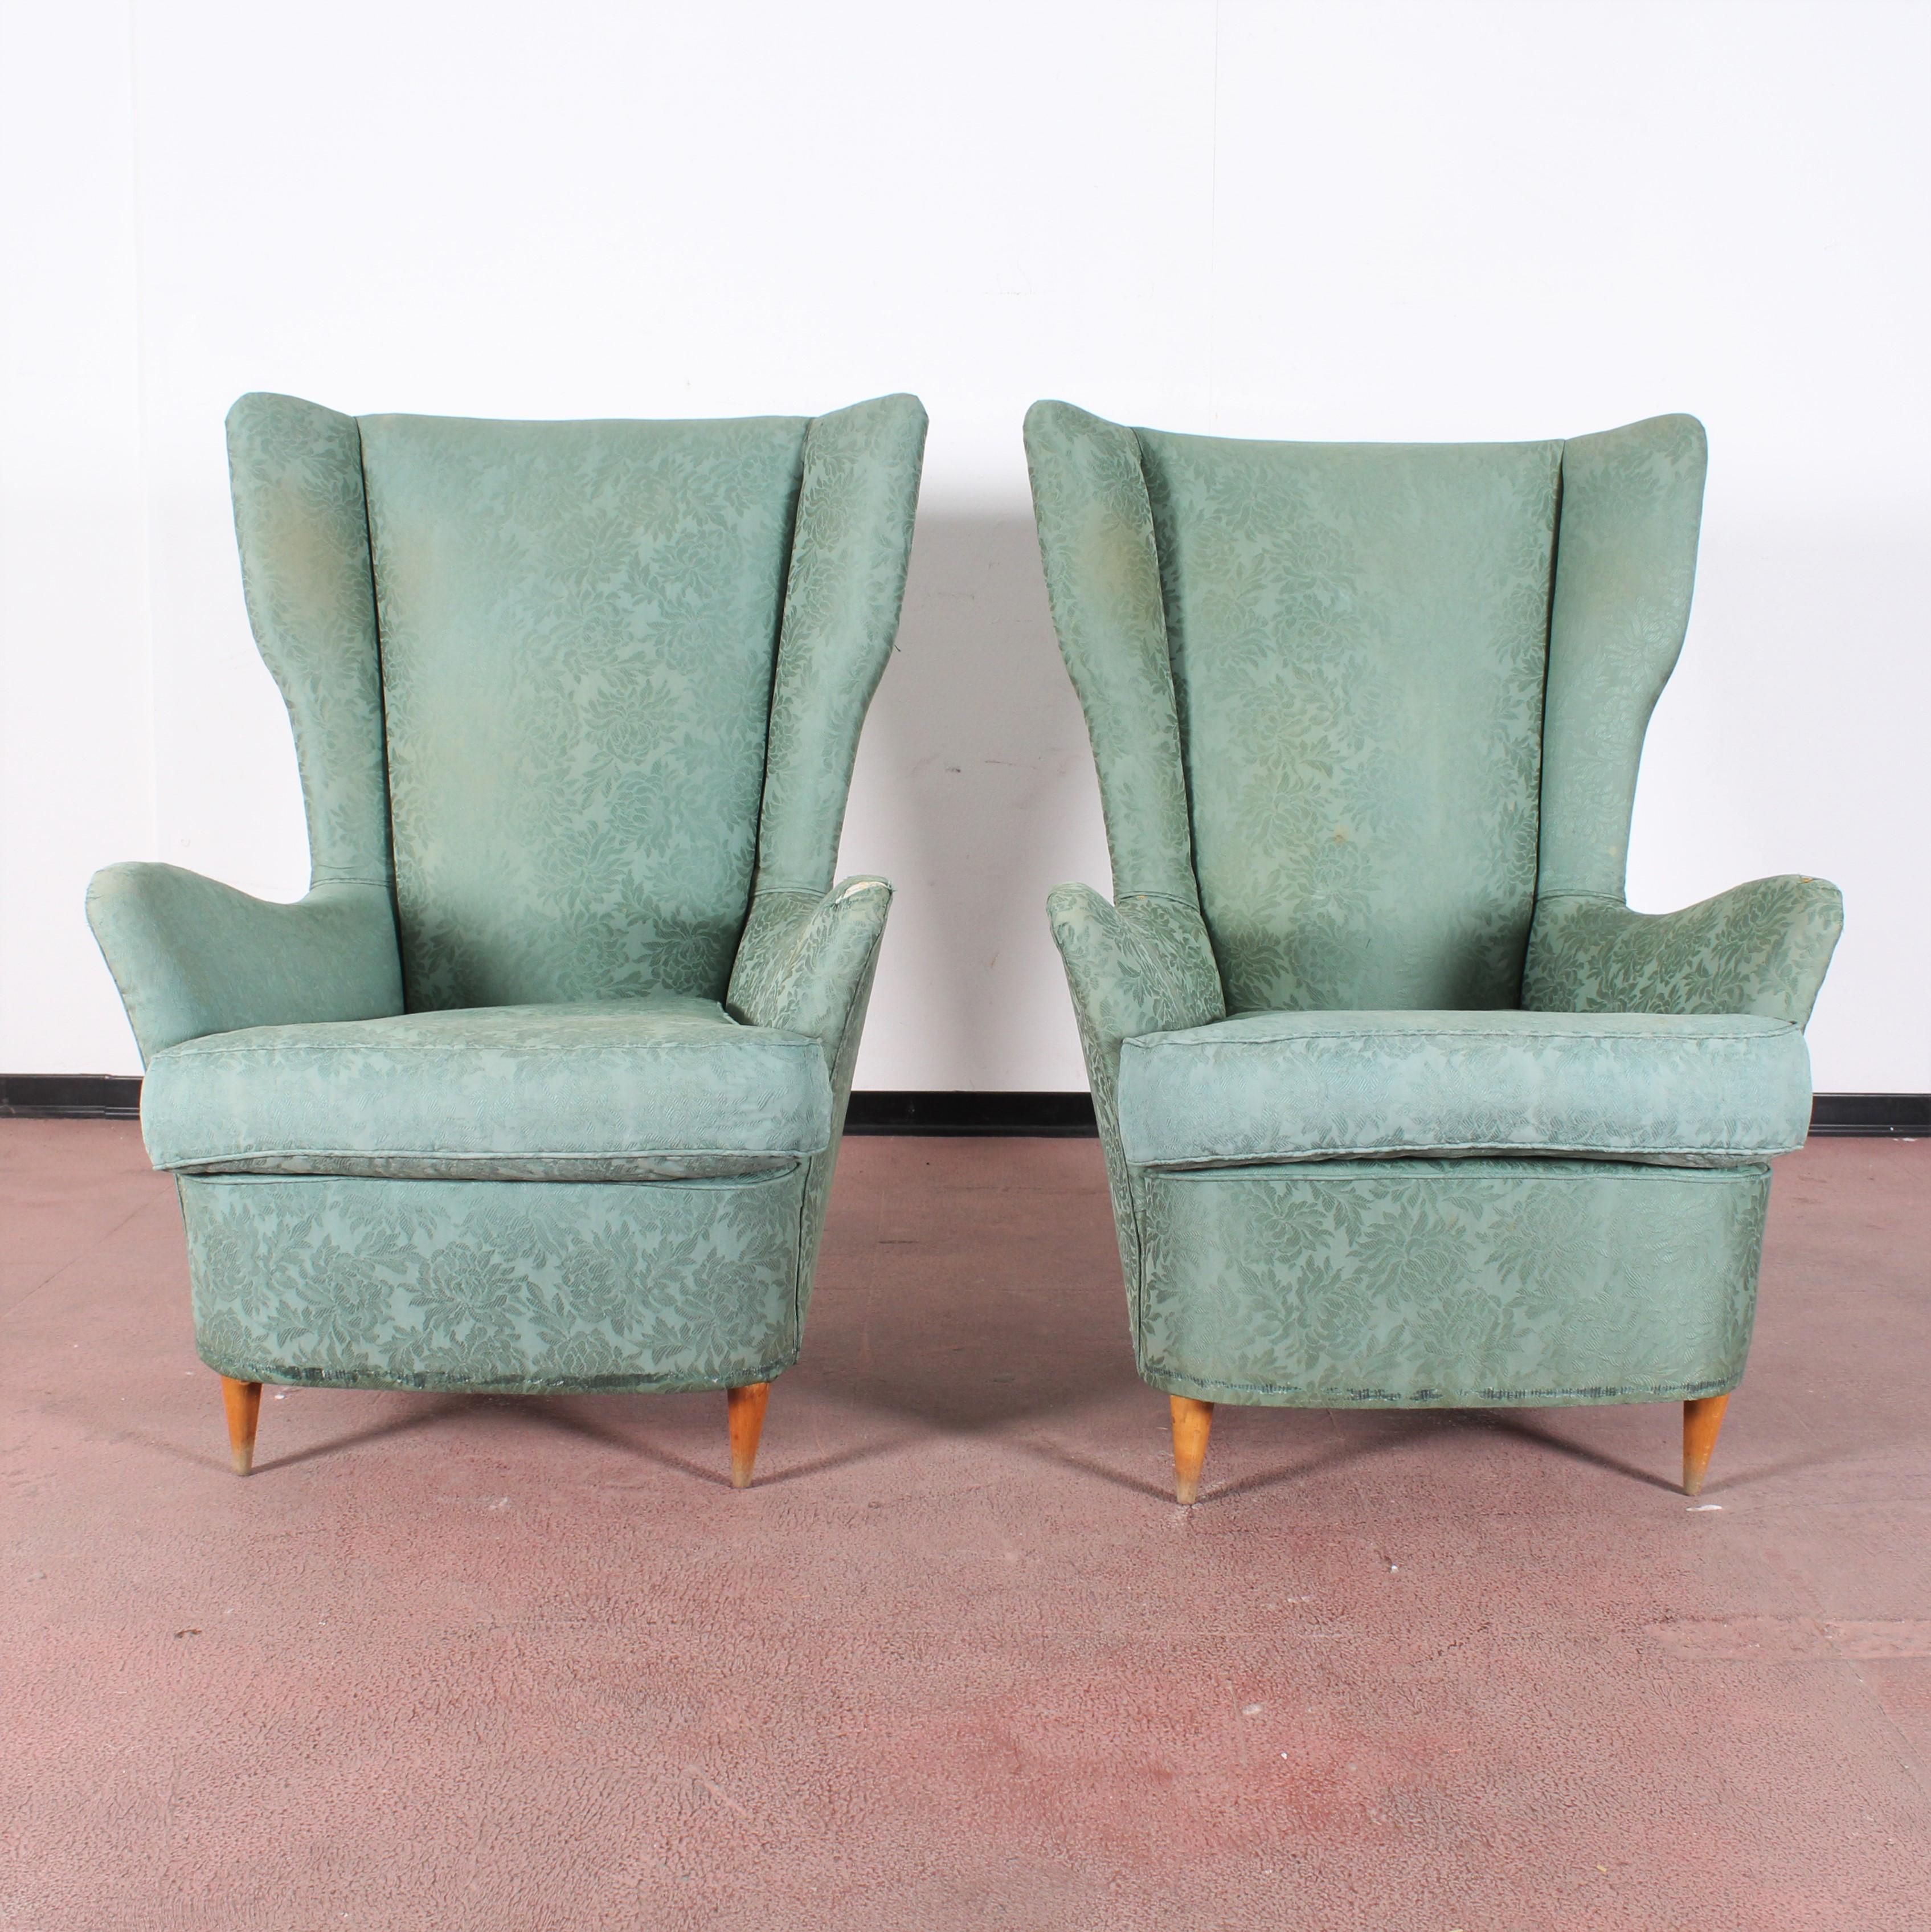 Midcentury Gio Ponti for ISA Pair of Armchairs Green Fabric, Italy, 1950s 1